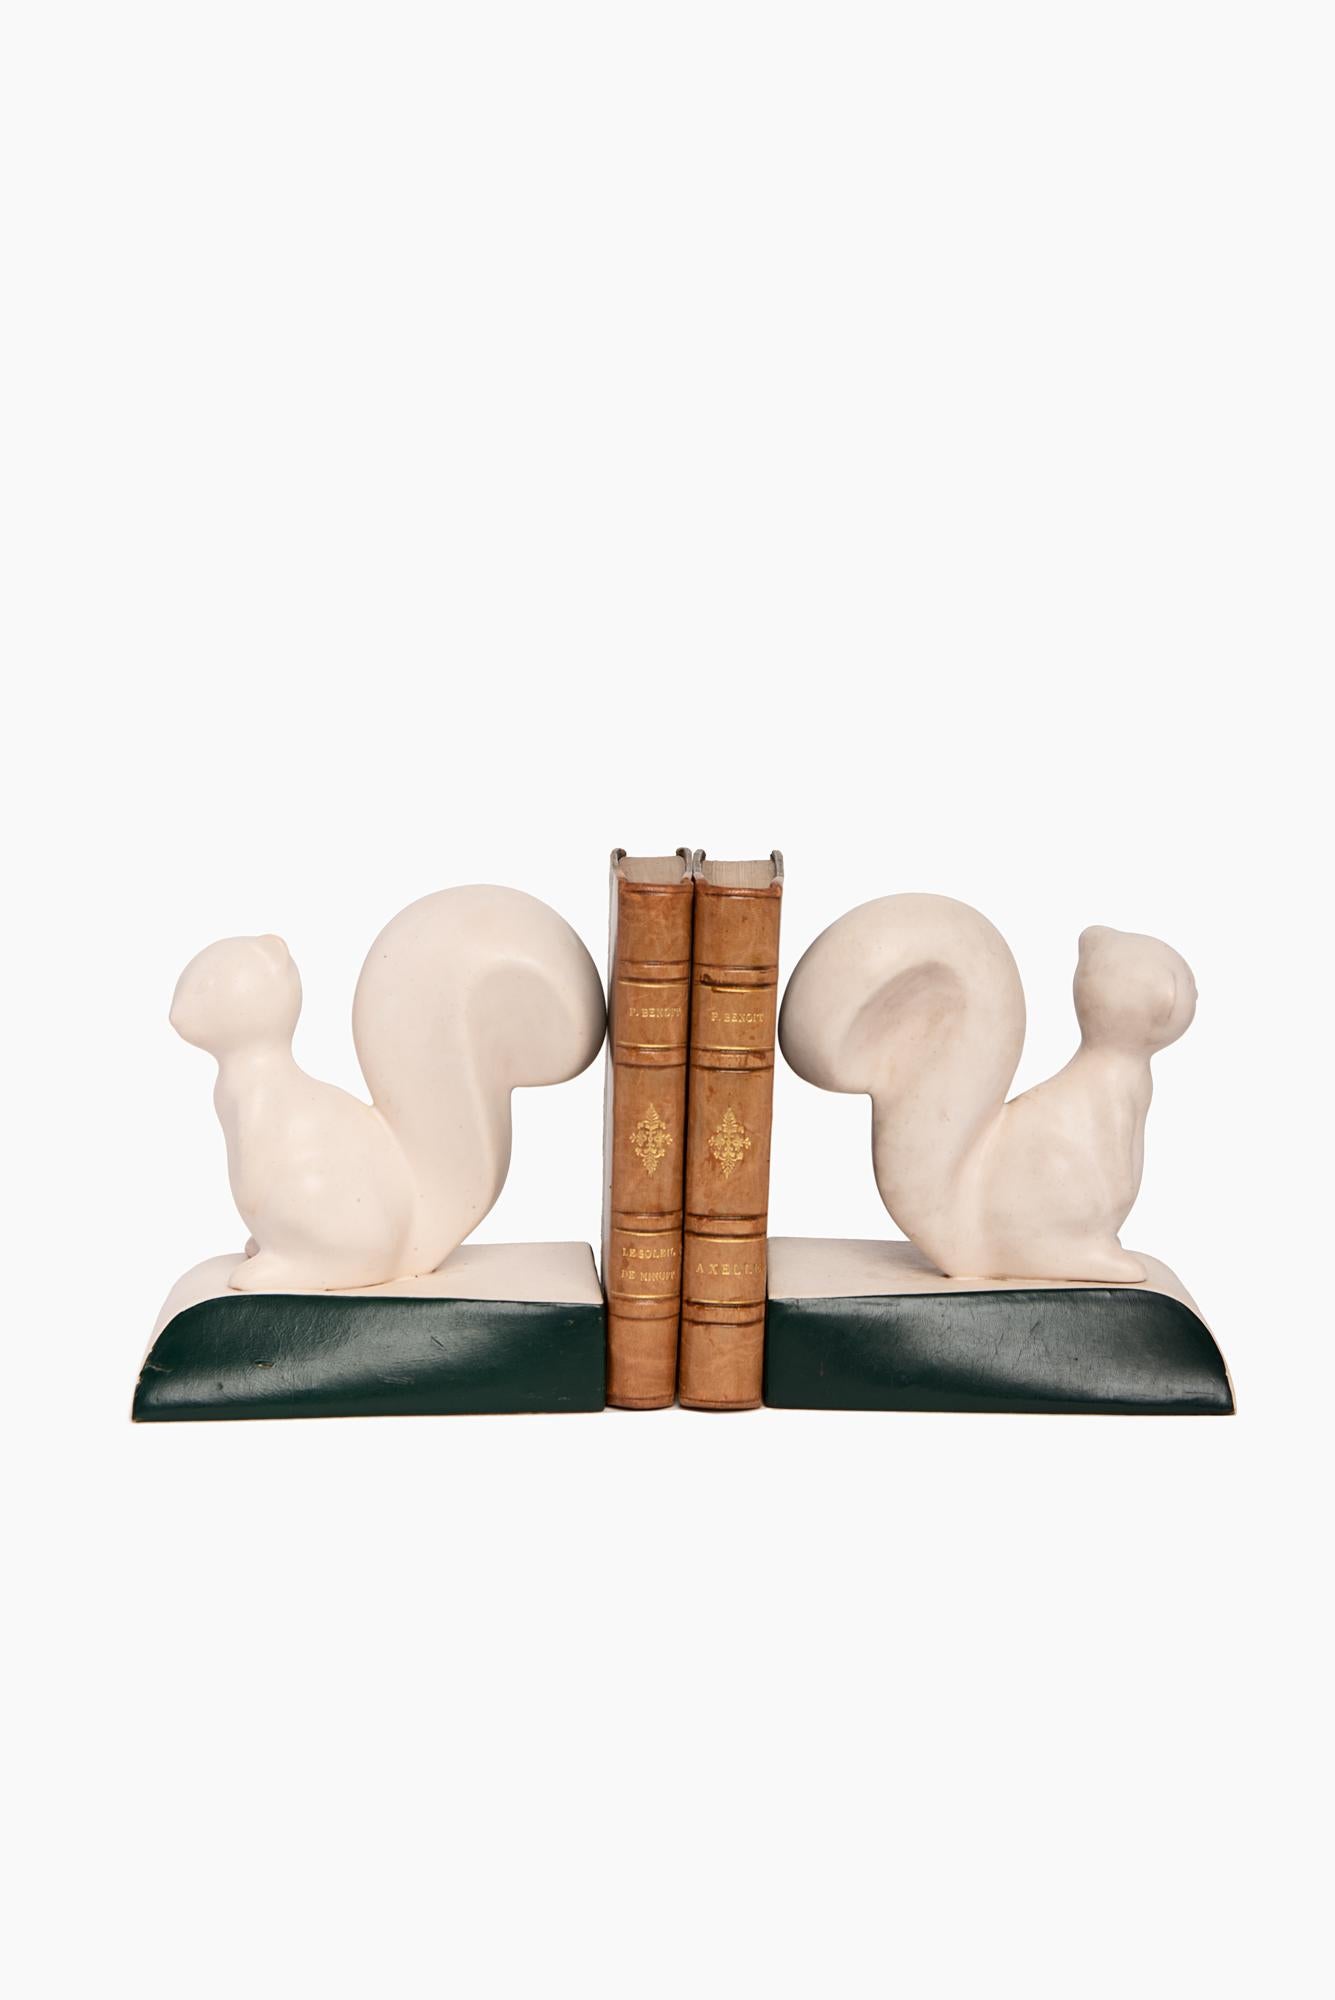 20th Century Art Deco Pair Of  Bookends In The Shape Of Squirrels In Porcelain Leather France